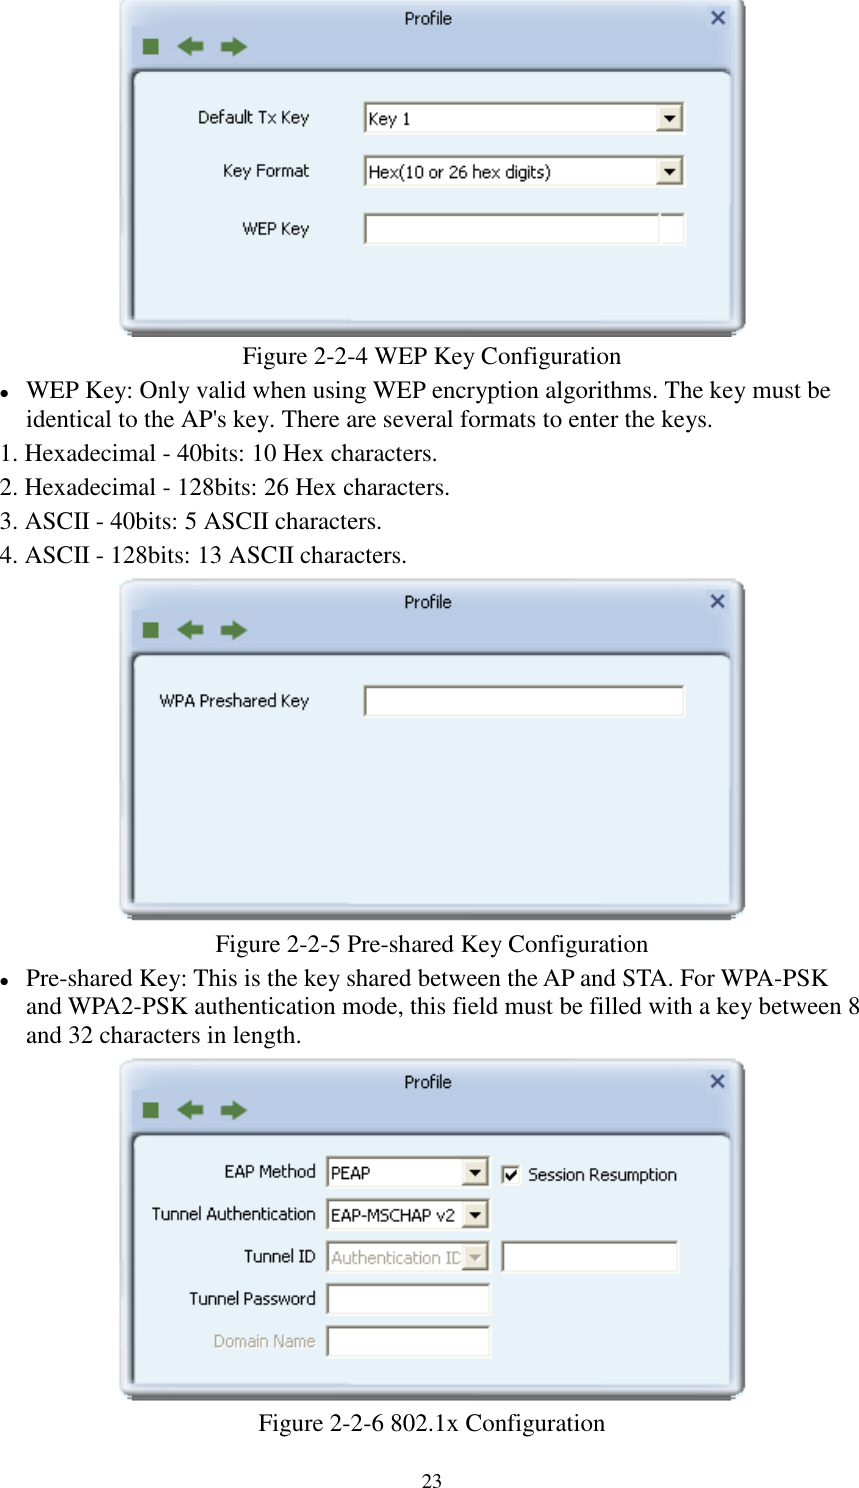 23Figure 2-2-4 WEP Key ConfigurationWEP Key: Only valid when using WEP encryption algorithms. The key must beidentical to the AP&apos;s key. There are several formats to enter the keys.1. Hexadecimal - 40bits: 10 Hex characters.2. Hexadecimal - 128bits: 26 Hex characters.3. ASCII - 40bits: 5 ASCII characters.4. ASCII - 128bits: 13 ASCII characters.Figure 2-2-5 Pre-shared Key ConfigurationPre-shared Key: This is the key shared between the AP and STA. For WPA-PSKand WPA2-PSK authentication mode, this field must be filled with a key between 8and 32 characters in length.Figure 2-2-6 802.1x Configuration